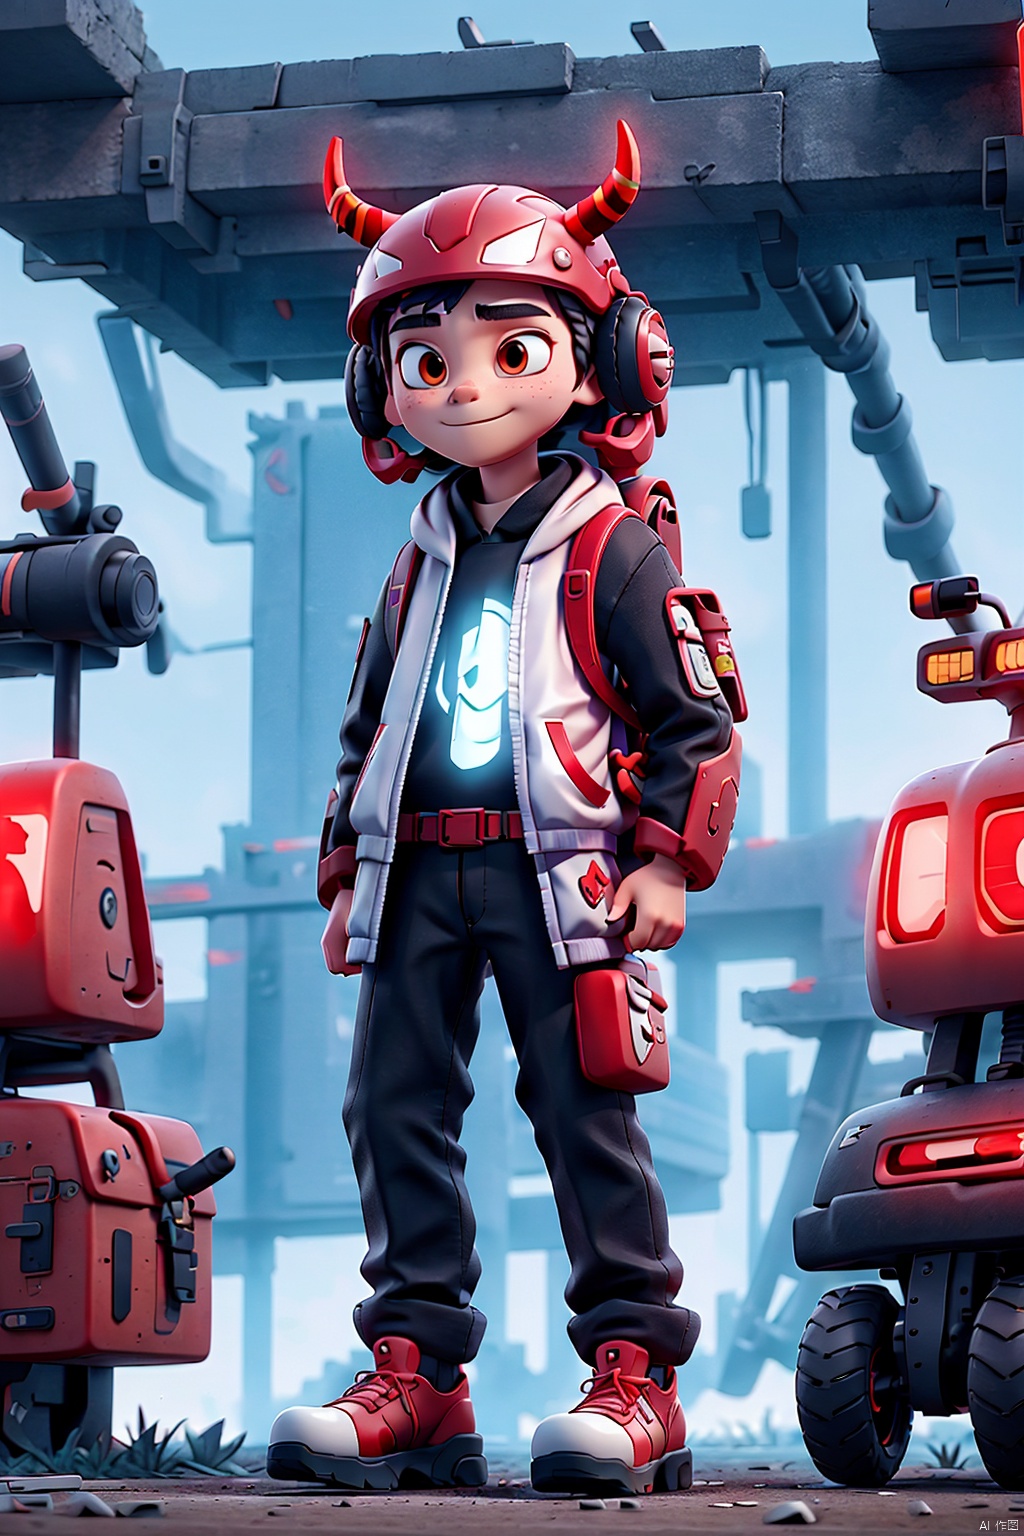 The image portrays a futuristic character adorned in a striking red and black attire. The helmet is equipped with horns and has multiple attachments, while the backpack is large and red with symbols and a large blade. The character's shoes are white with red accents, and the overall design exudes a cyberpunk or dystopian aesthetic
,迪士尼